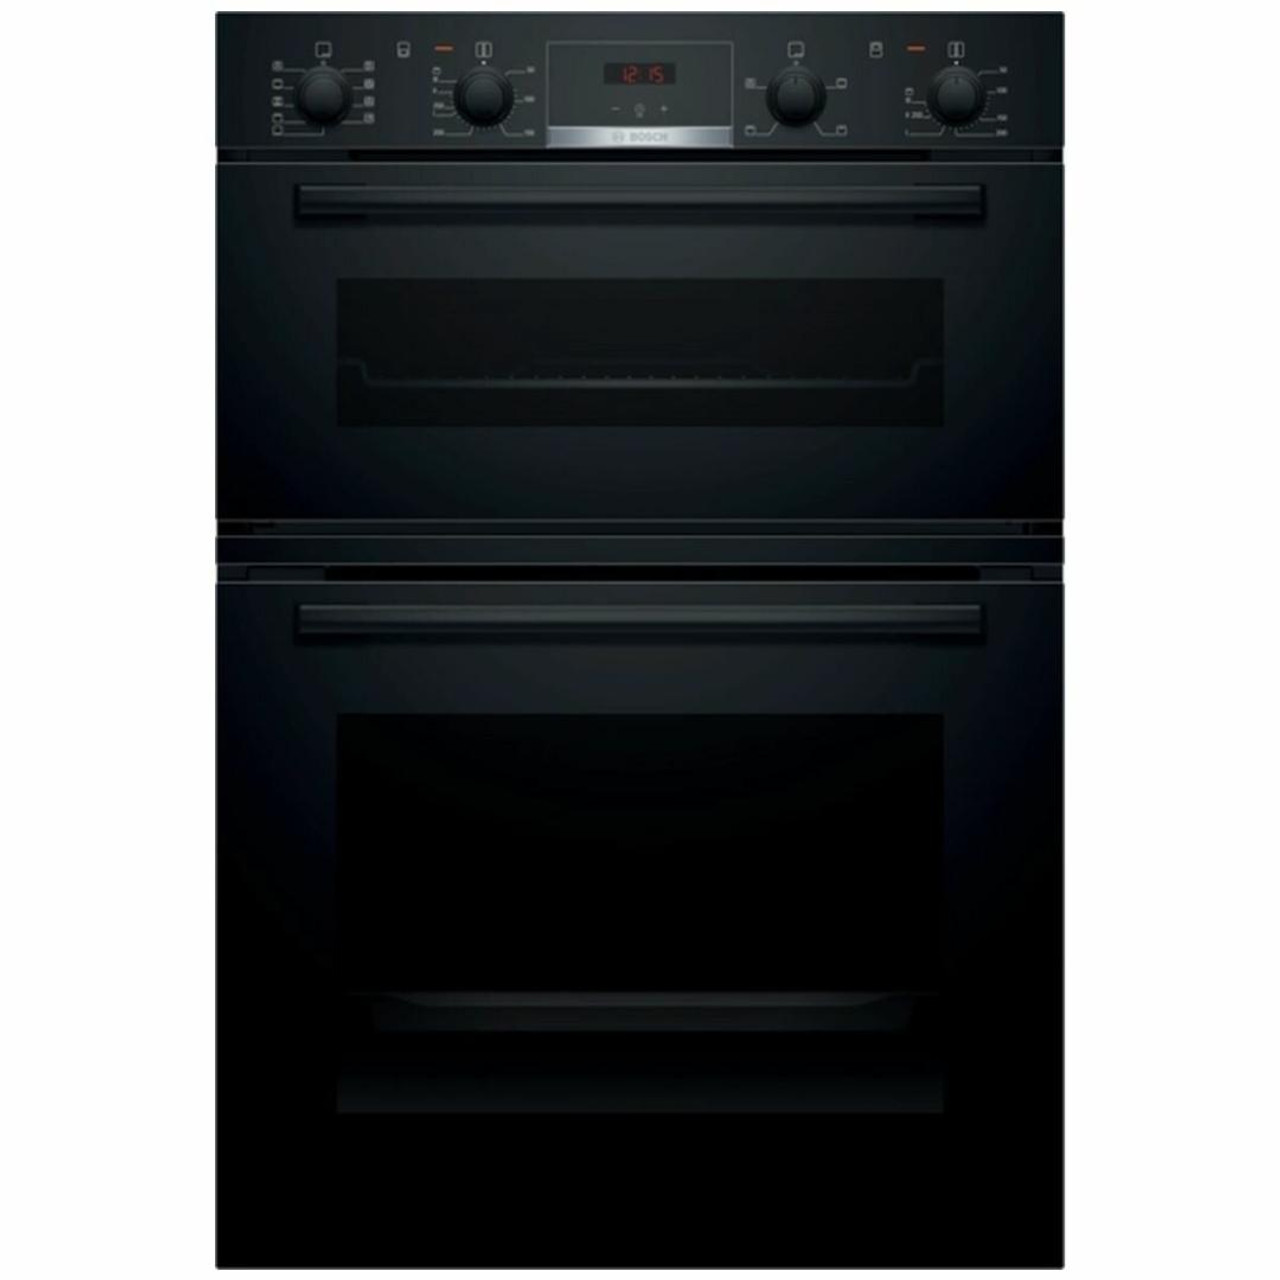 MBA534BB0A - Serie 4 Built-in Double Oven - Black